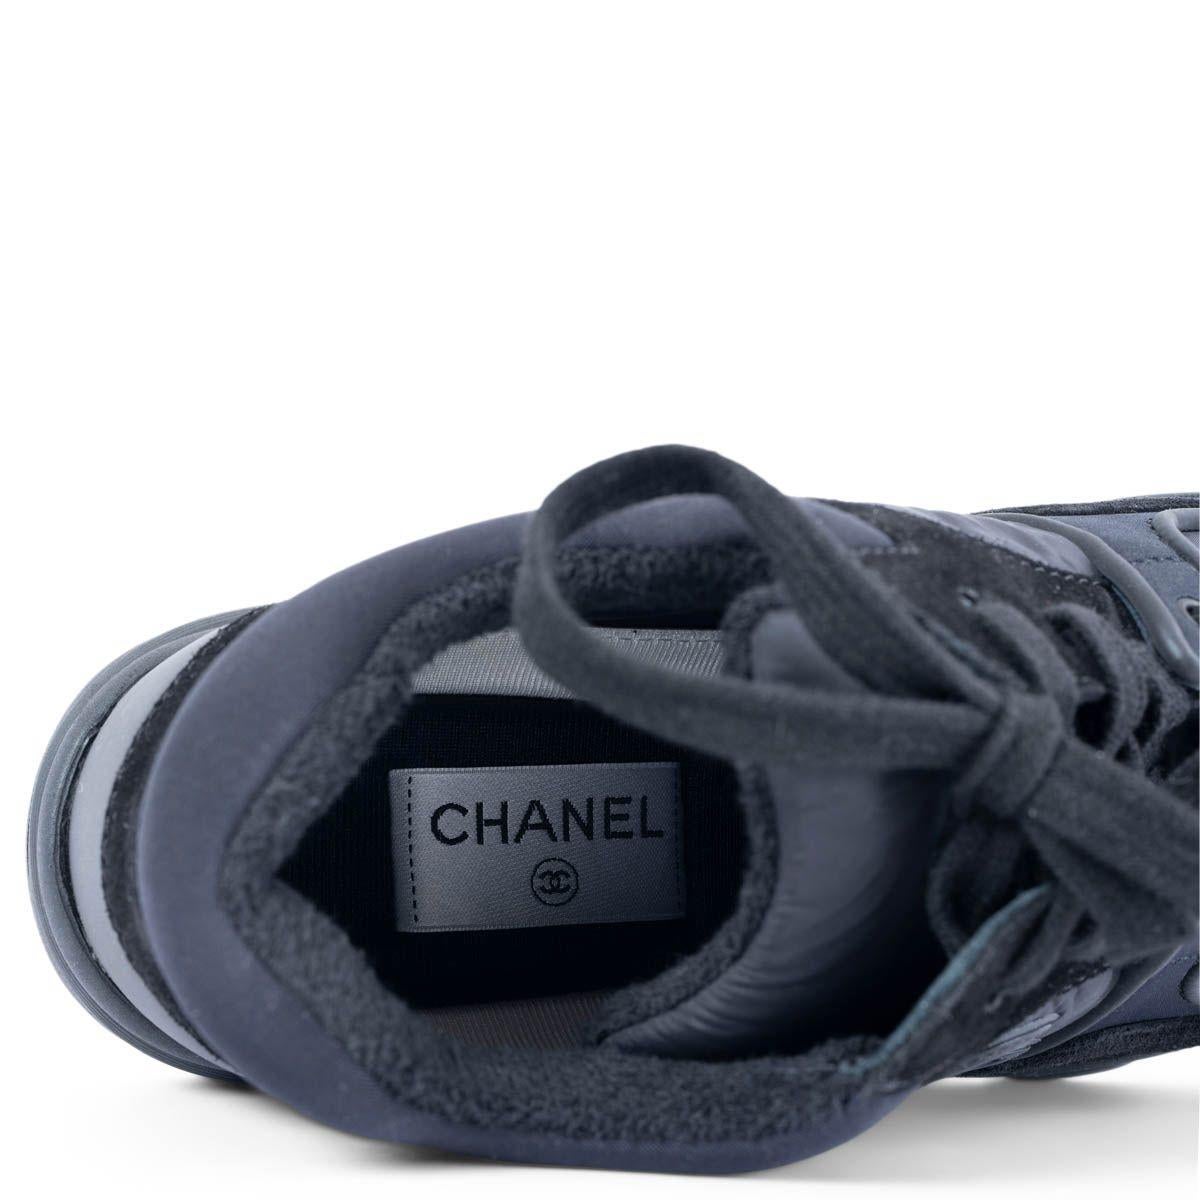 CHANEL black suede & mesh REV Sneakers Shoes 38.5 For Sale 3